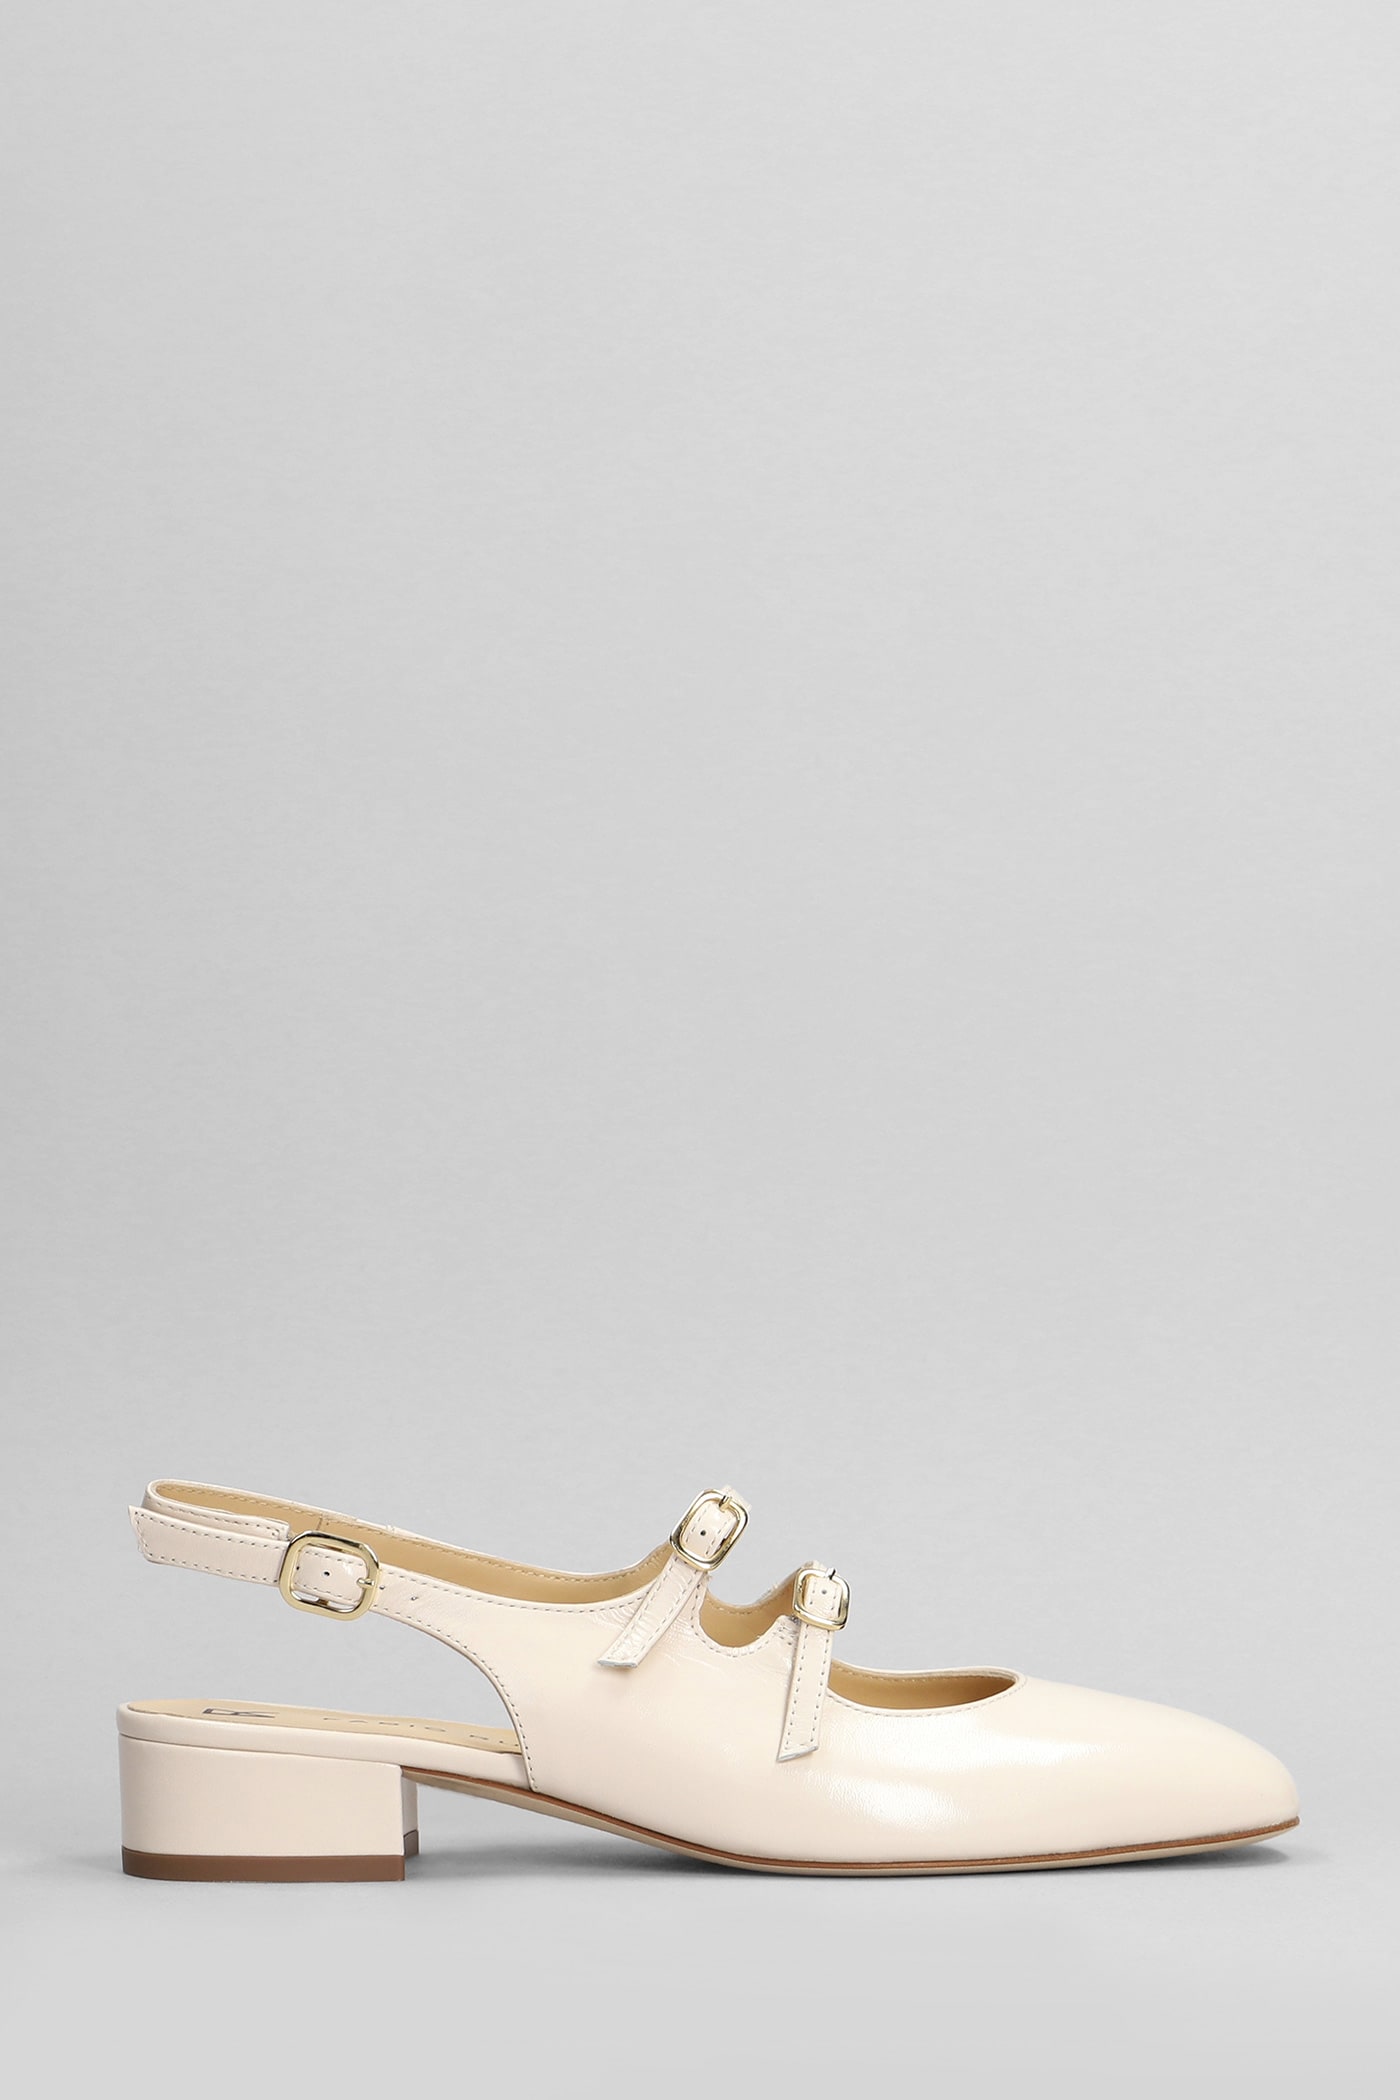 Pumps In Beige Leather